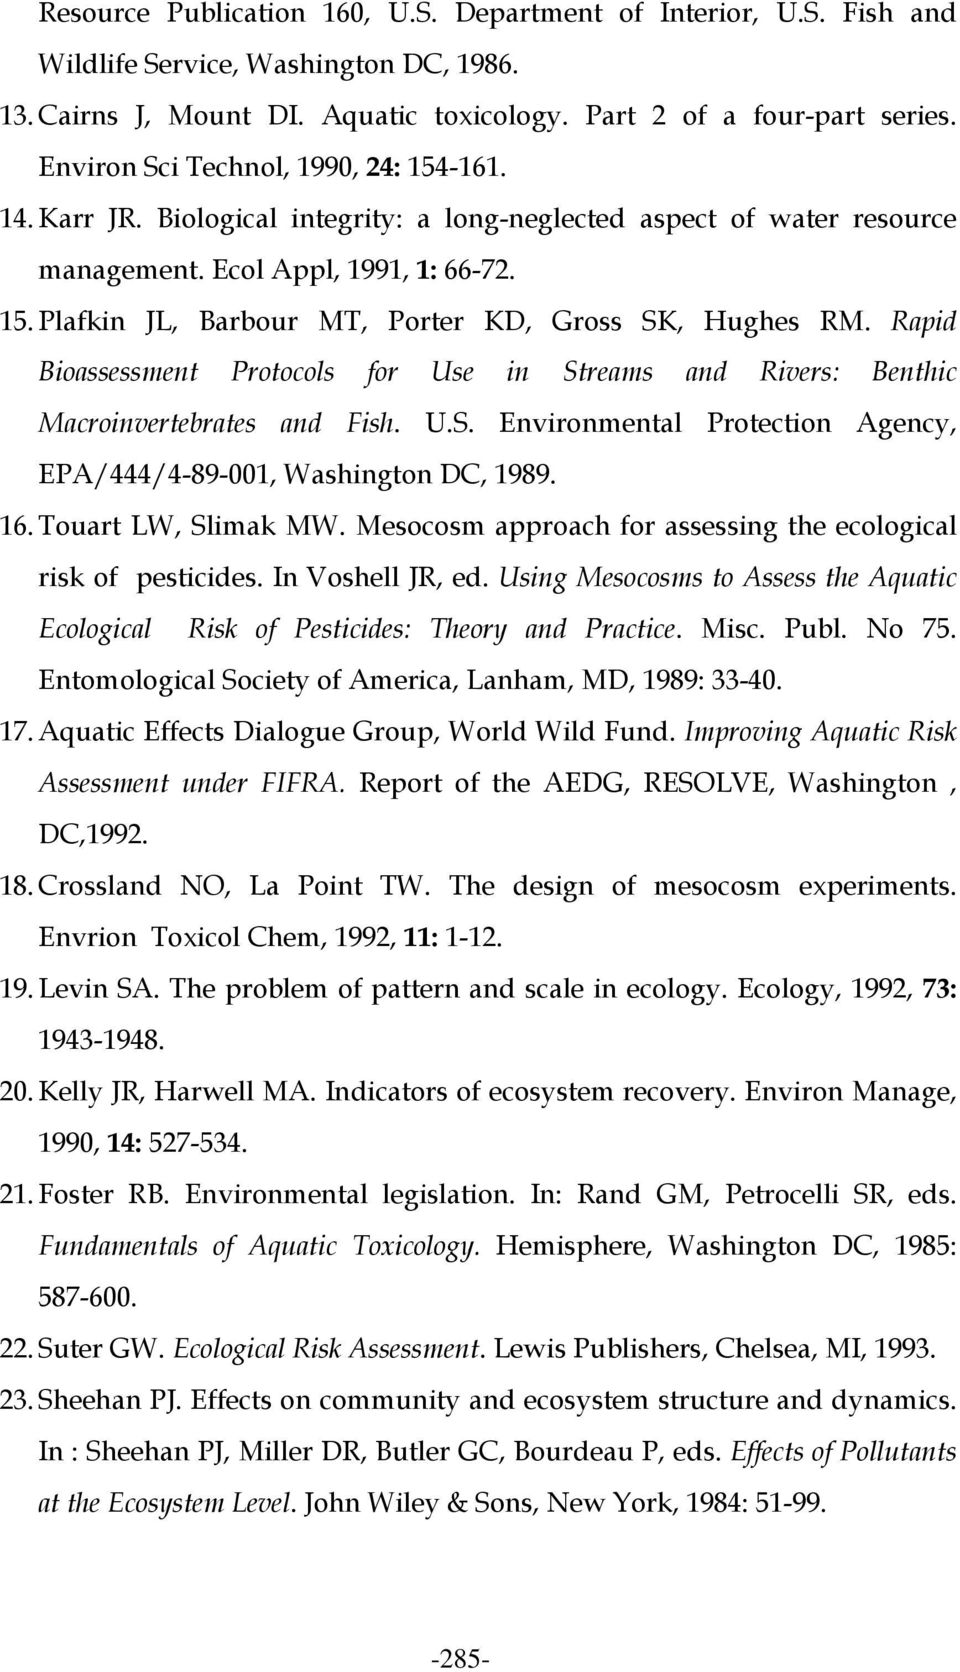 Rapid Bioassessment Protocols for Use in Streams and Rivers: Benthic Macroinvertebrates and Fish. U.S. Environmental Protection Agency, EPA/444/4-89-001, Washington DC, 1989. 16. Touart LW, Slimak MW.